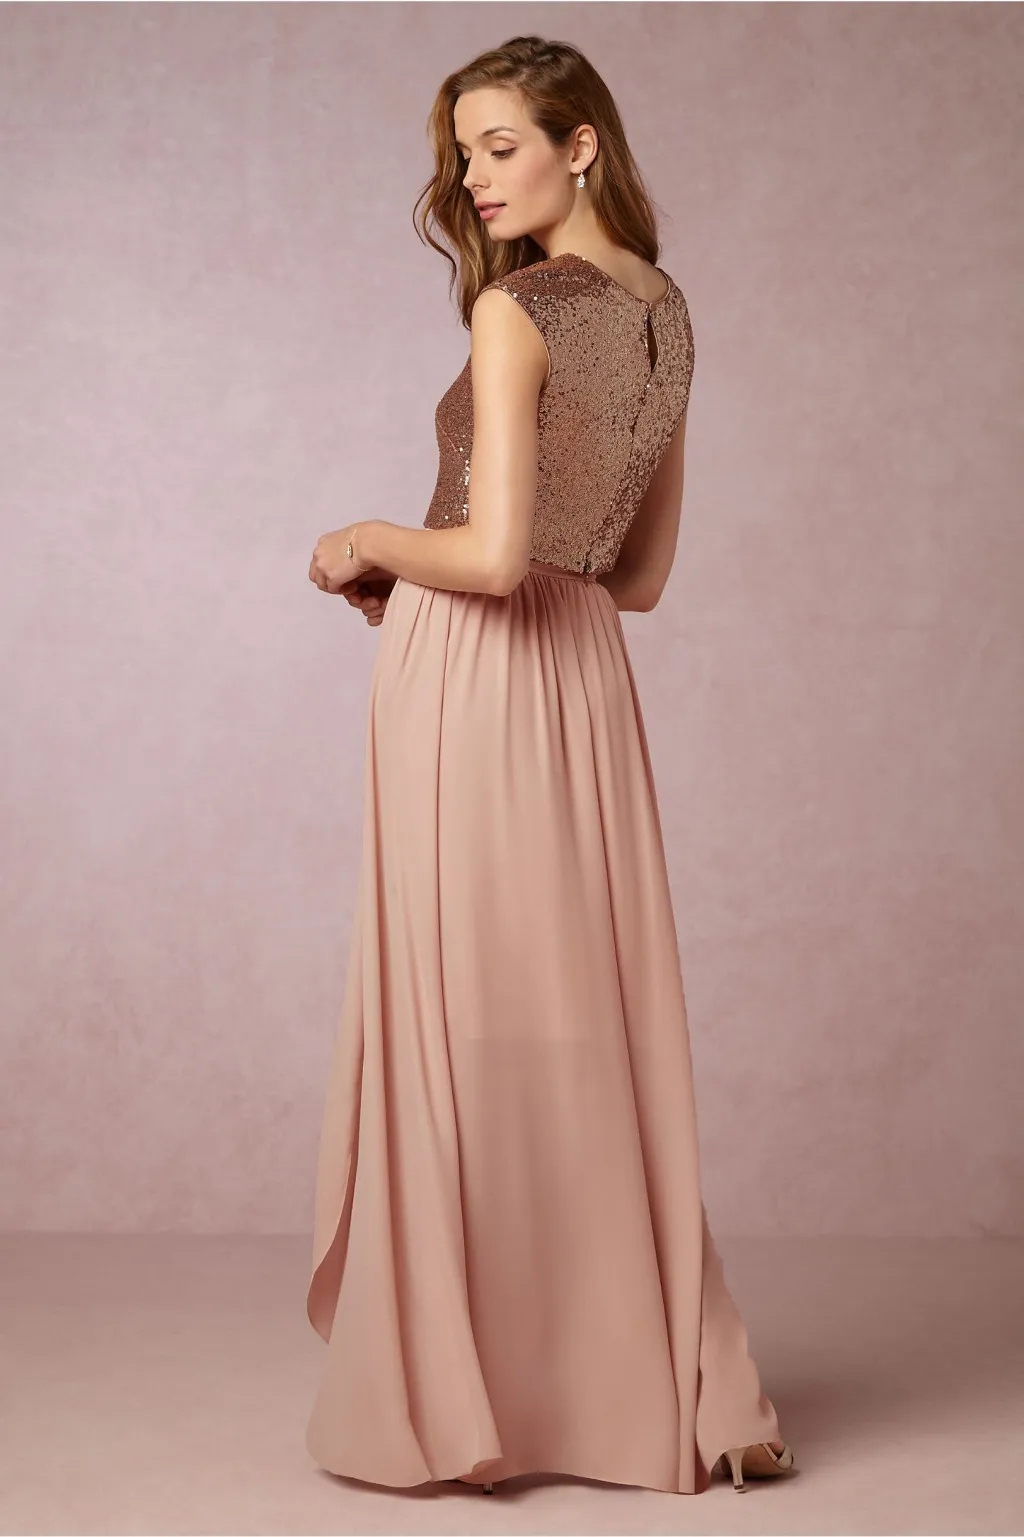 Bhldn Two Pieces Sequins Country Bridesmaid Dresses Cheap Jewel Neck Cap Sleeve Sweep Train Plus Size Long Bridesmaid Dress